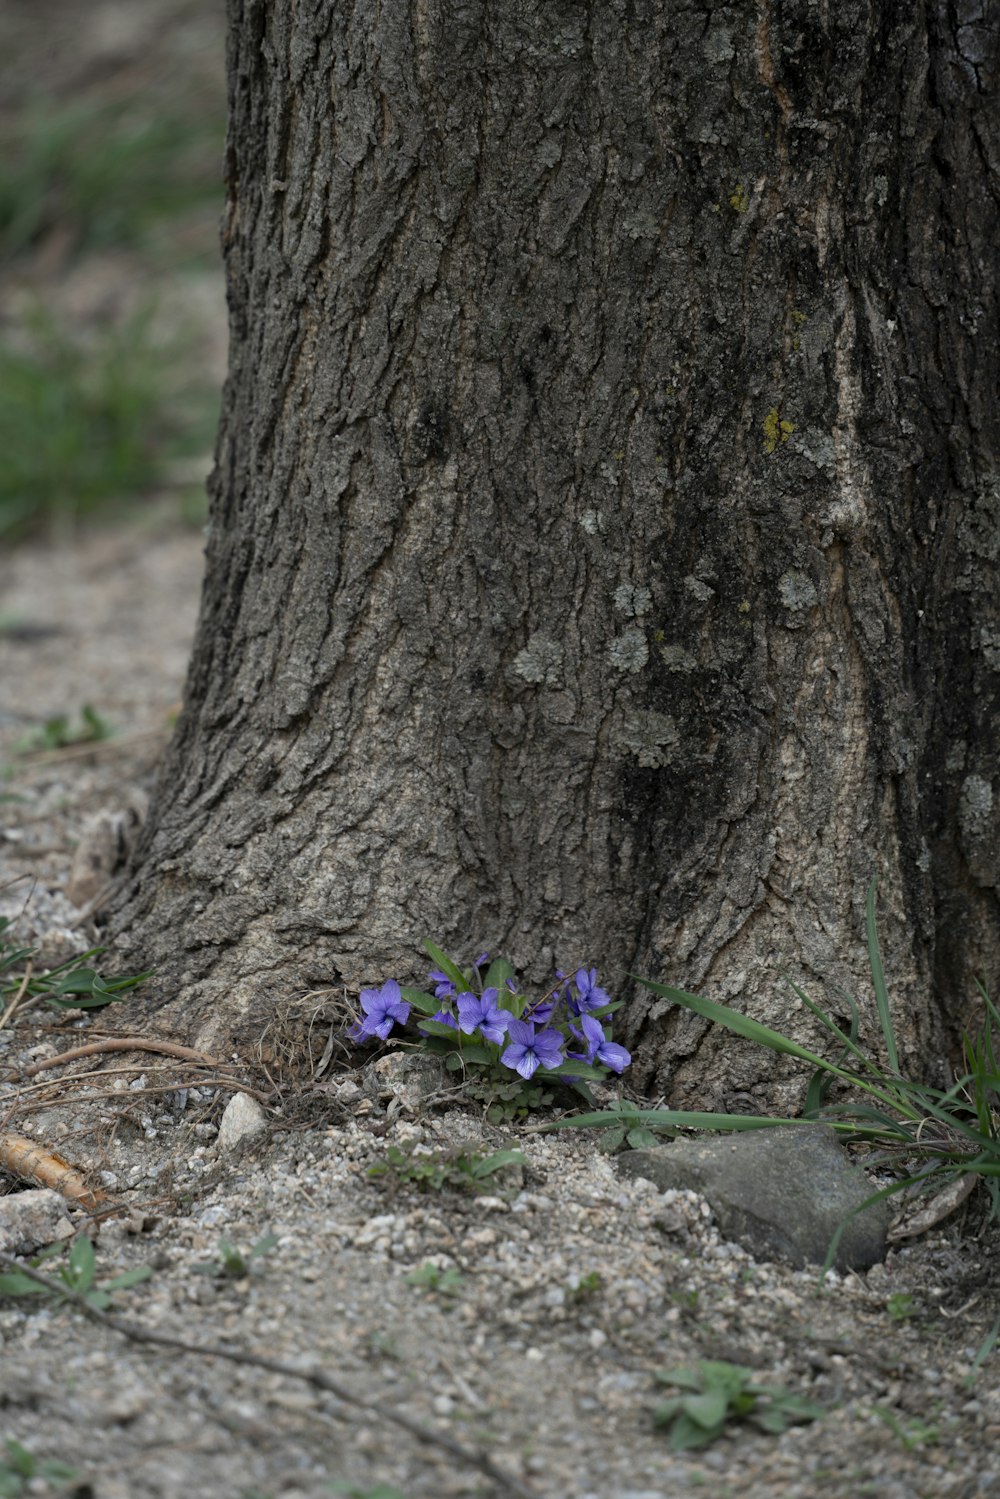 a purple flower is growing on the ground next to a tree